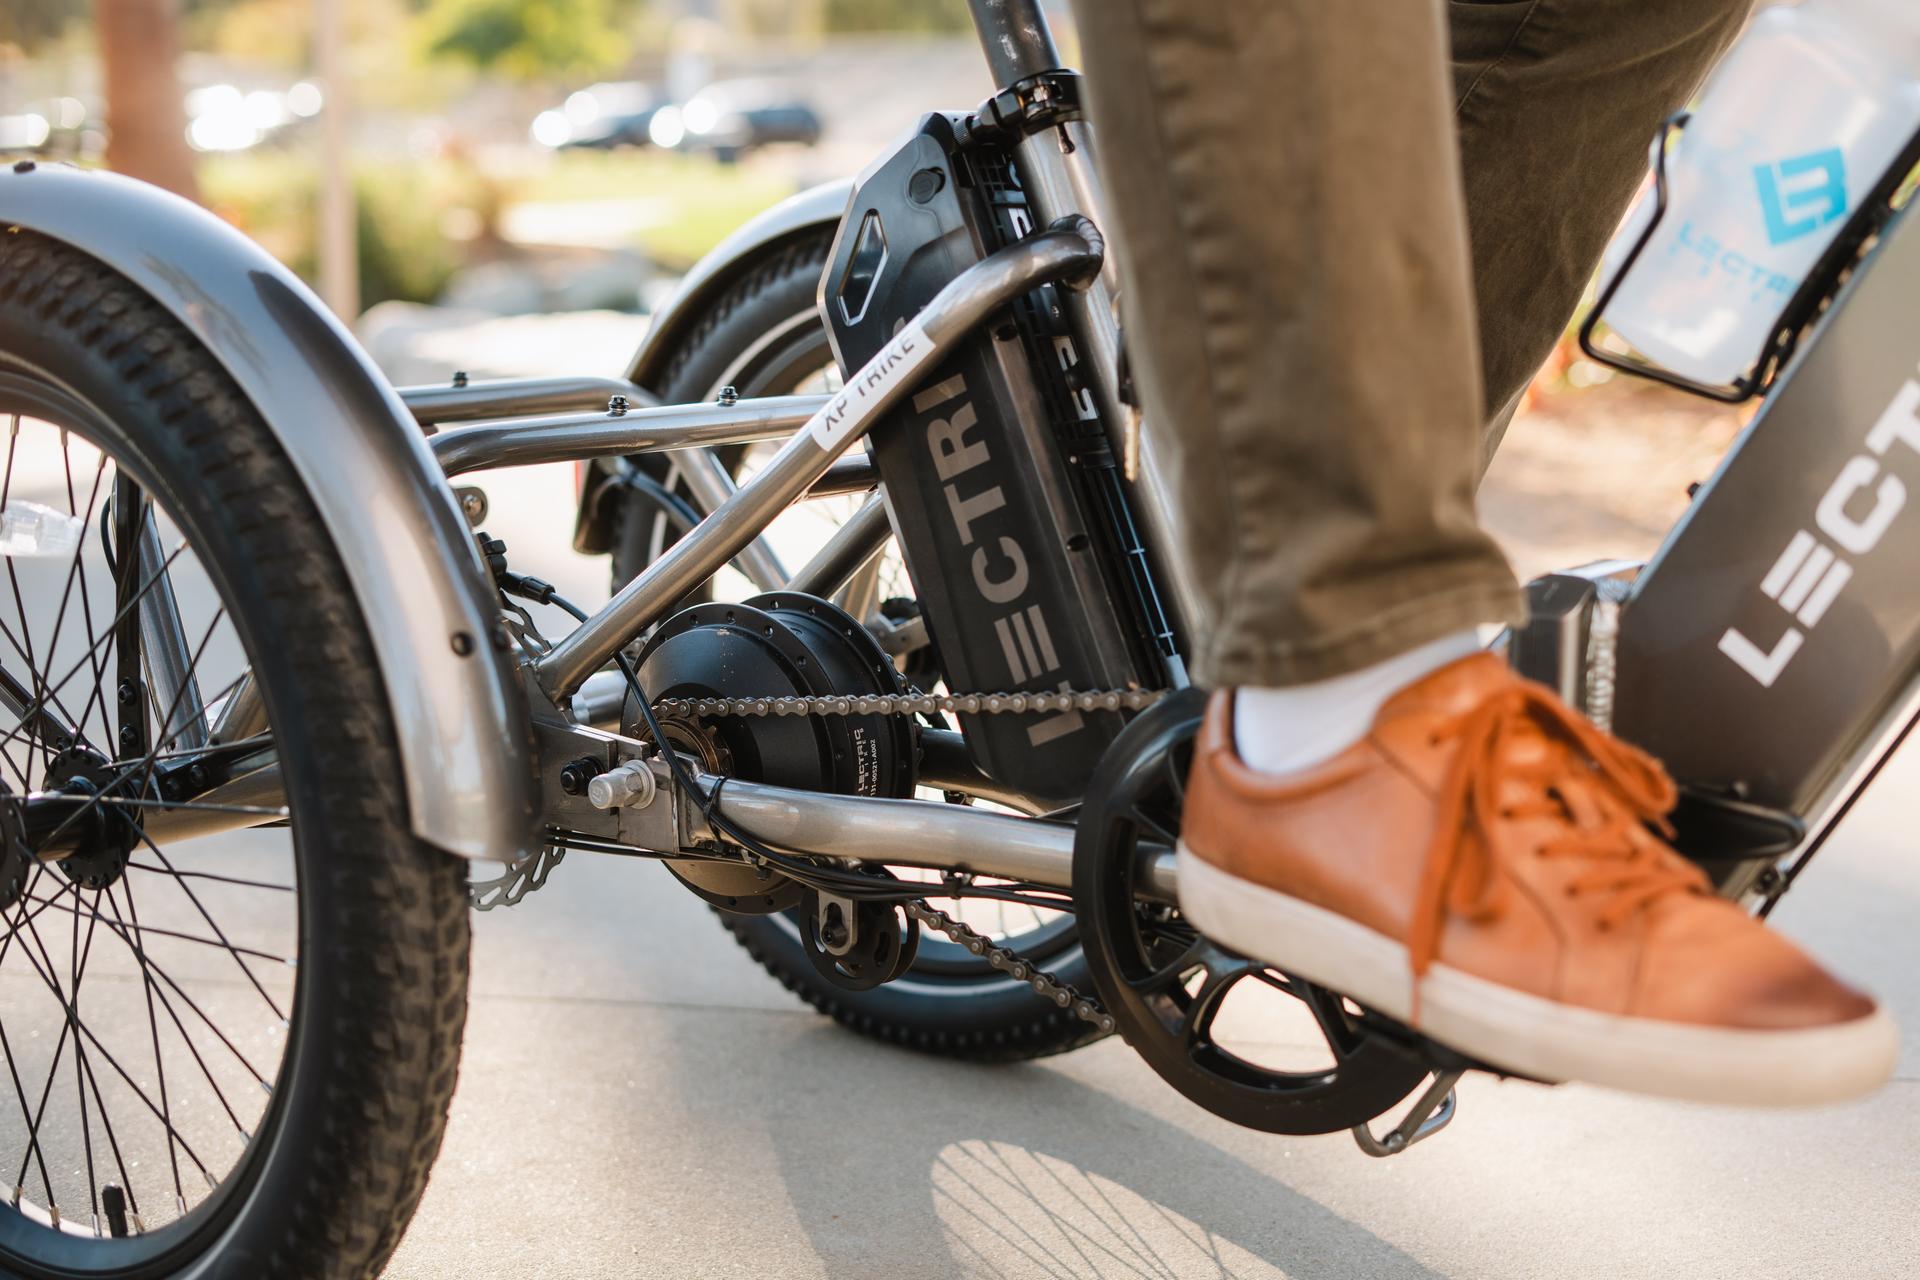 Lectric Launches Xp Trike Featuring Novel Single Hub Rear Drive Nasni Consultants